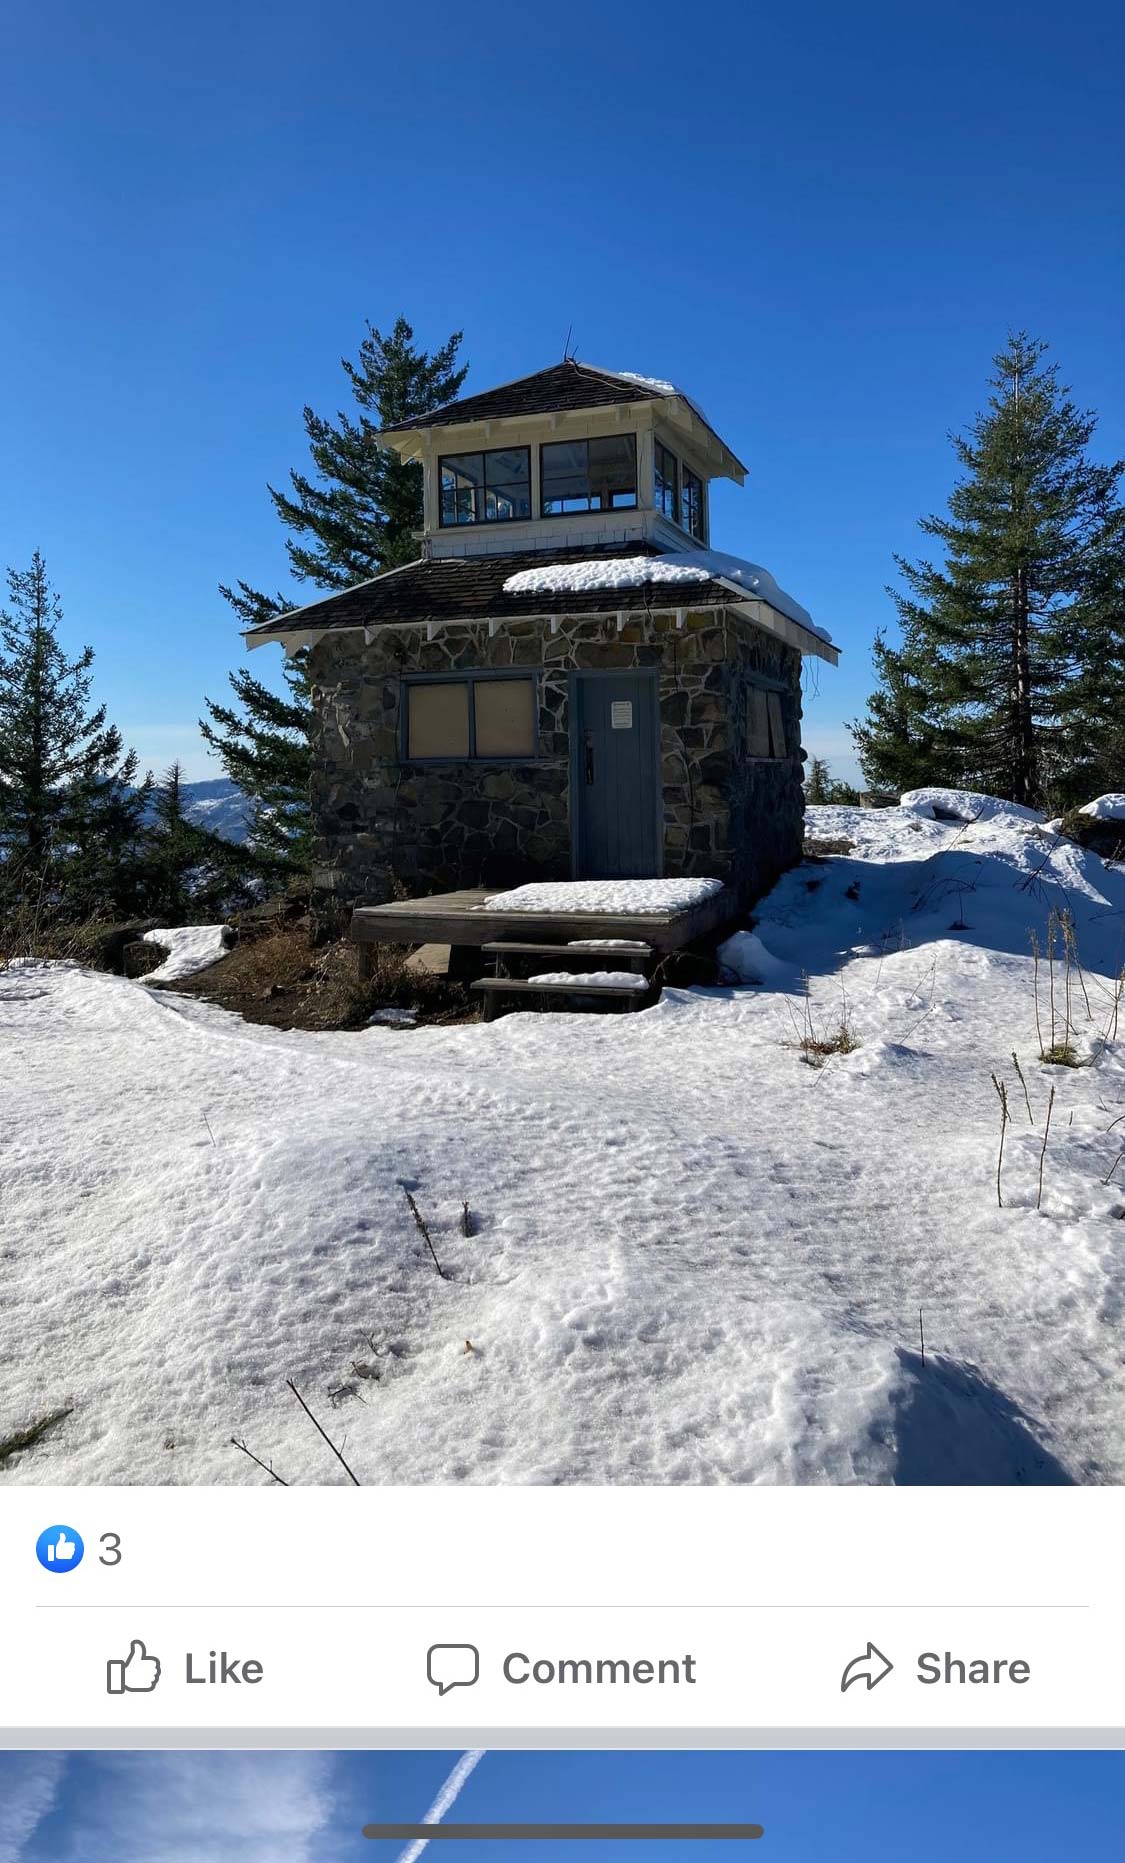 Social media screenshot with a fire lookout, made of snow, blanketed in snow